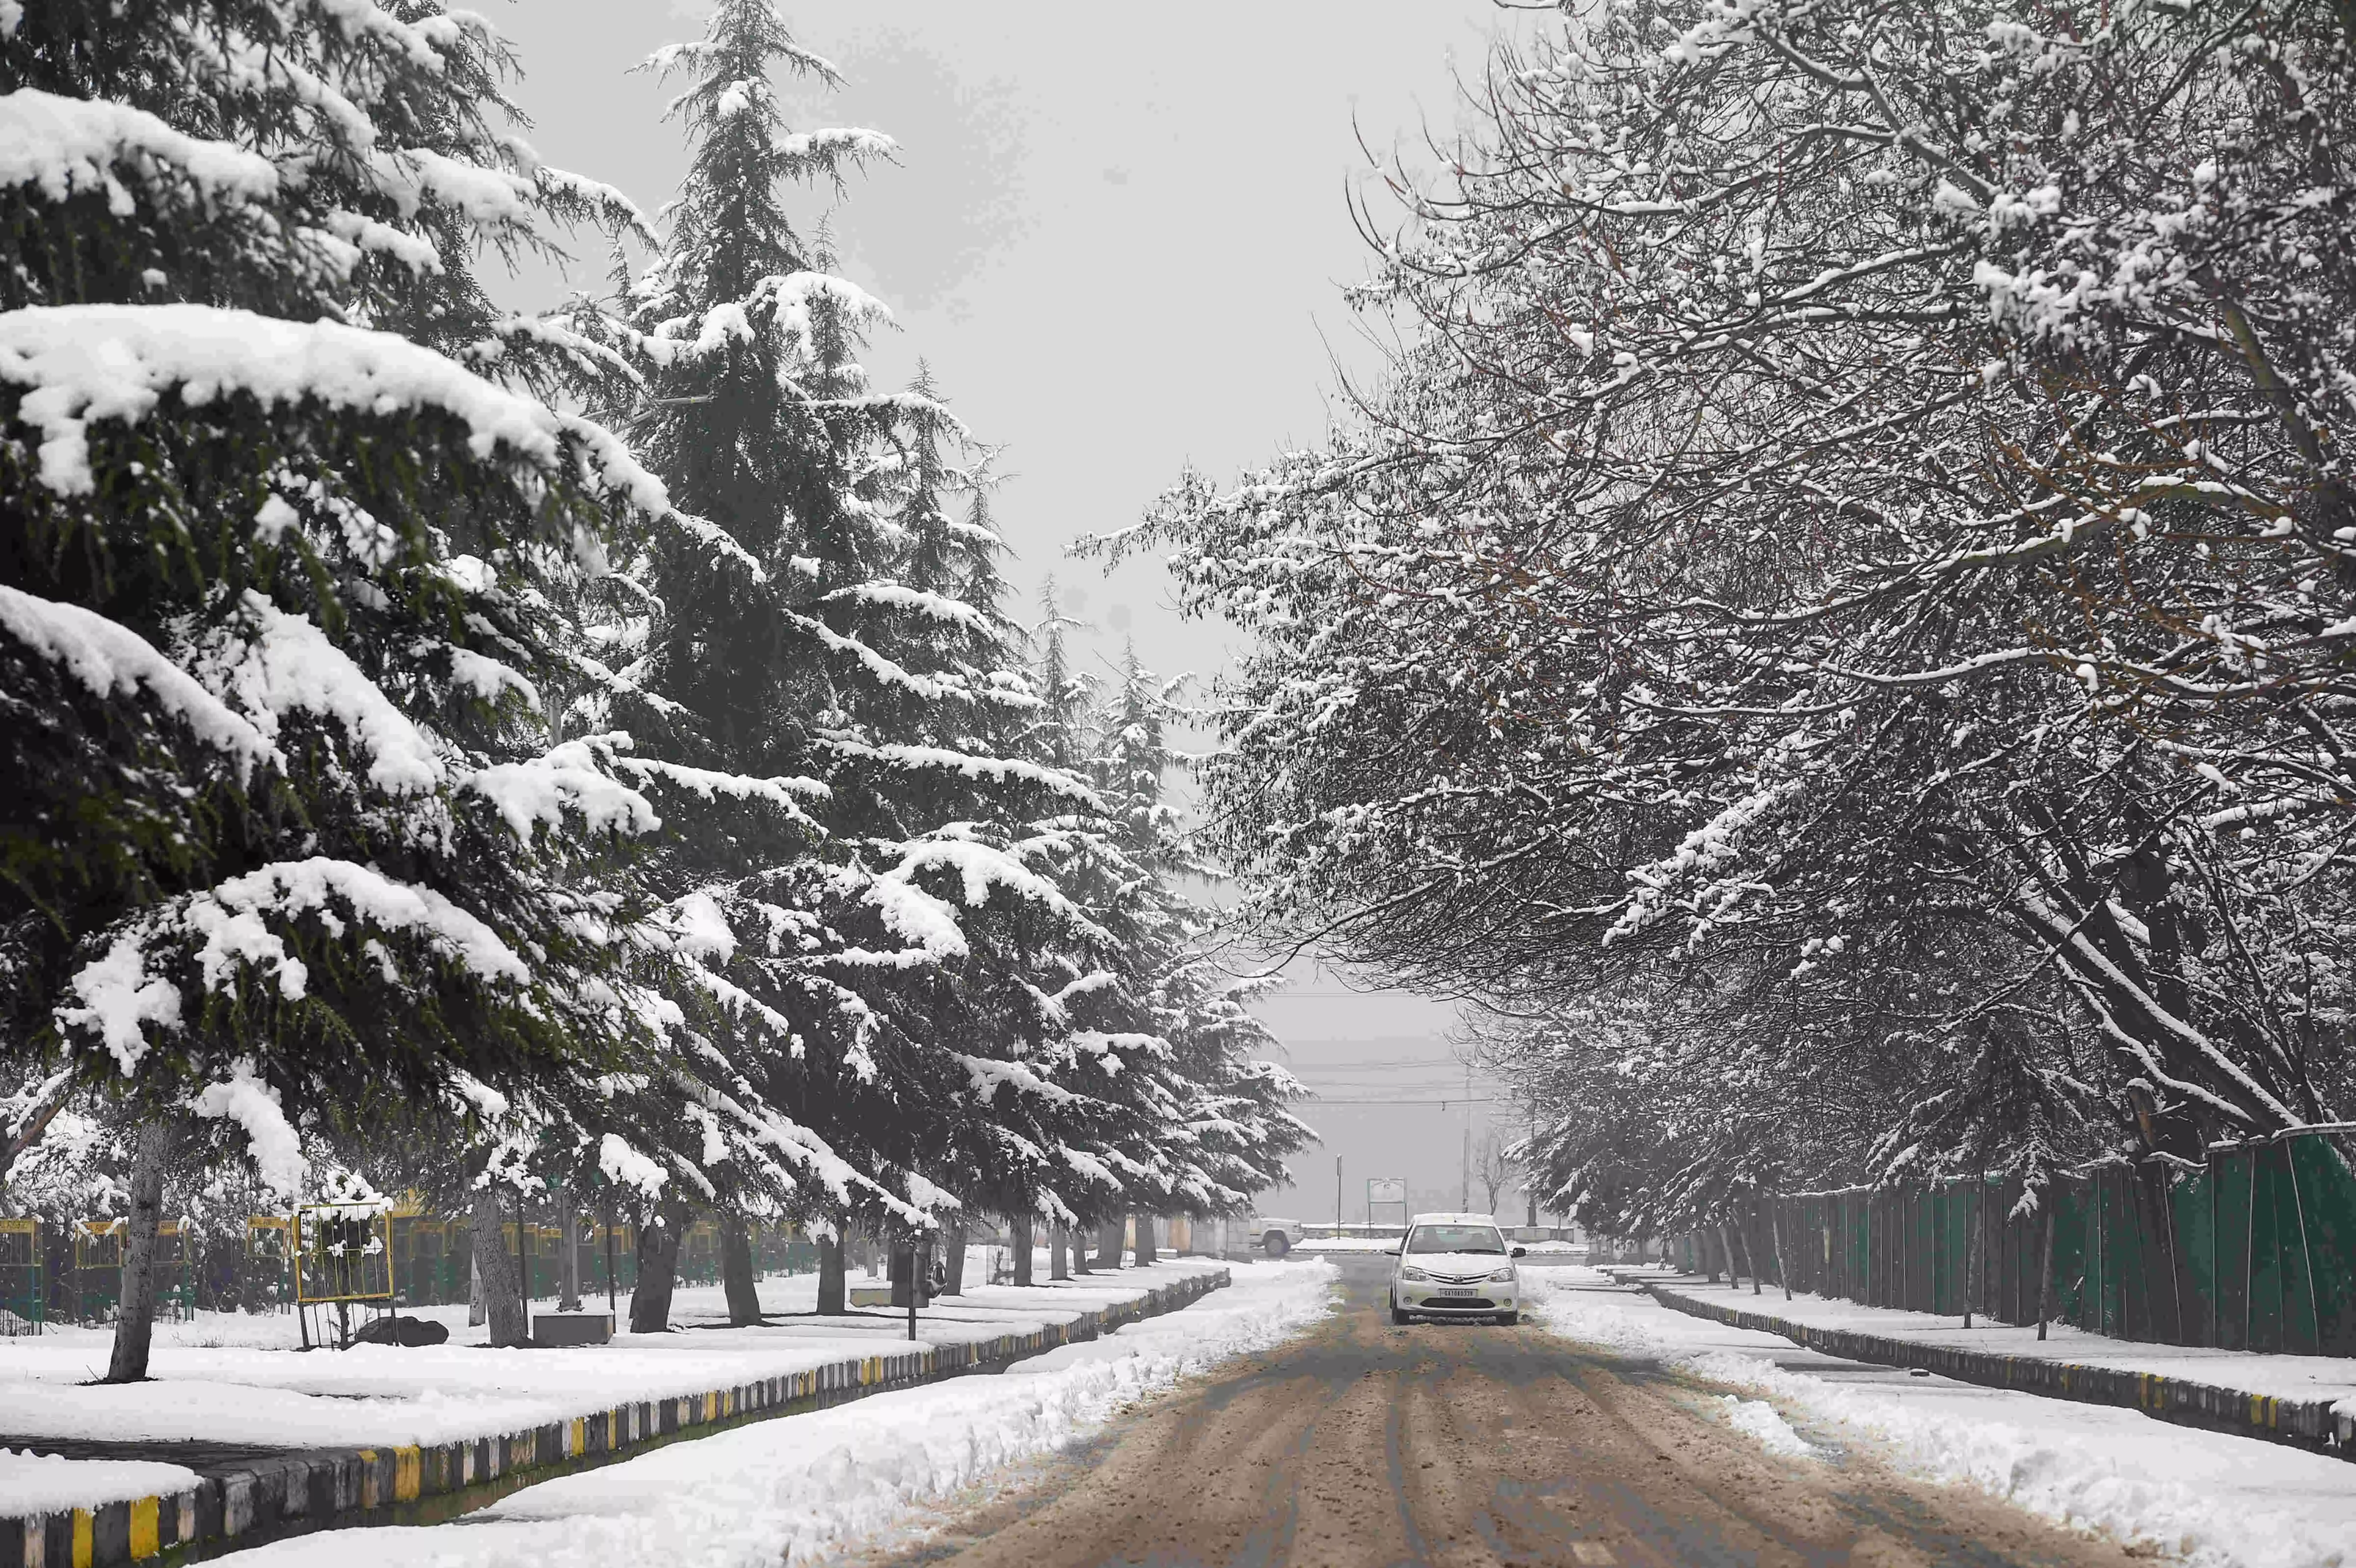 Cold Conditions Intensify Across Kashmir Valley, Many Places Record Lowest Temperature This Season